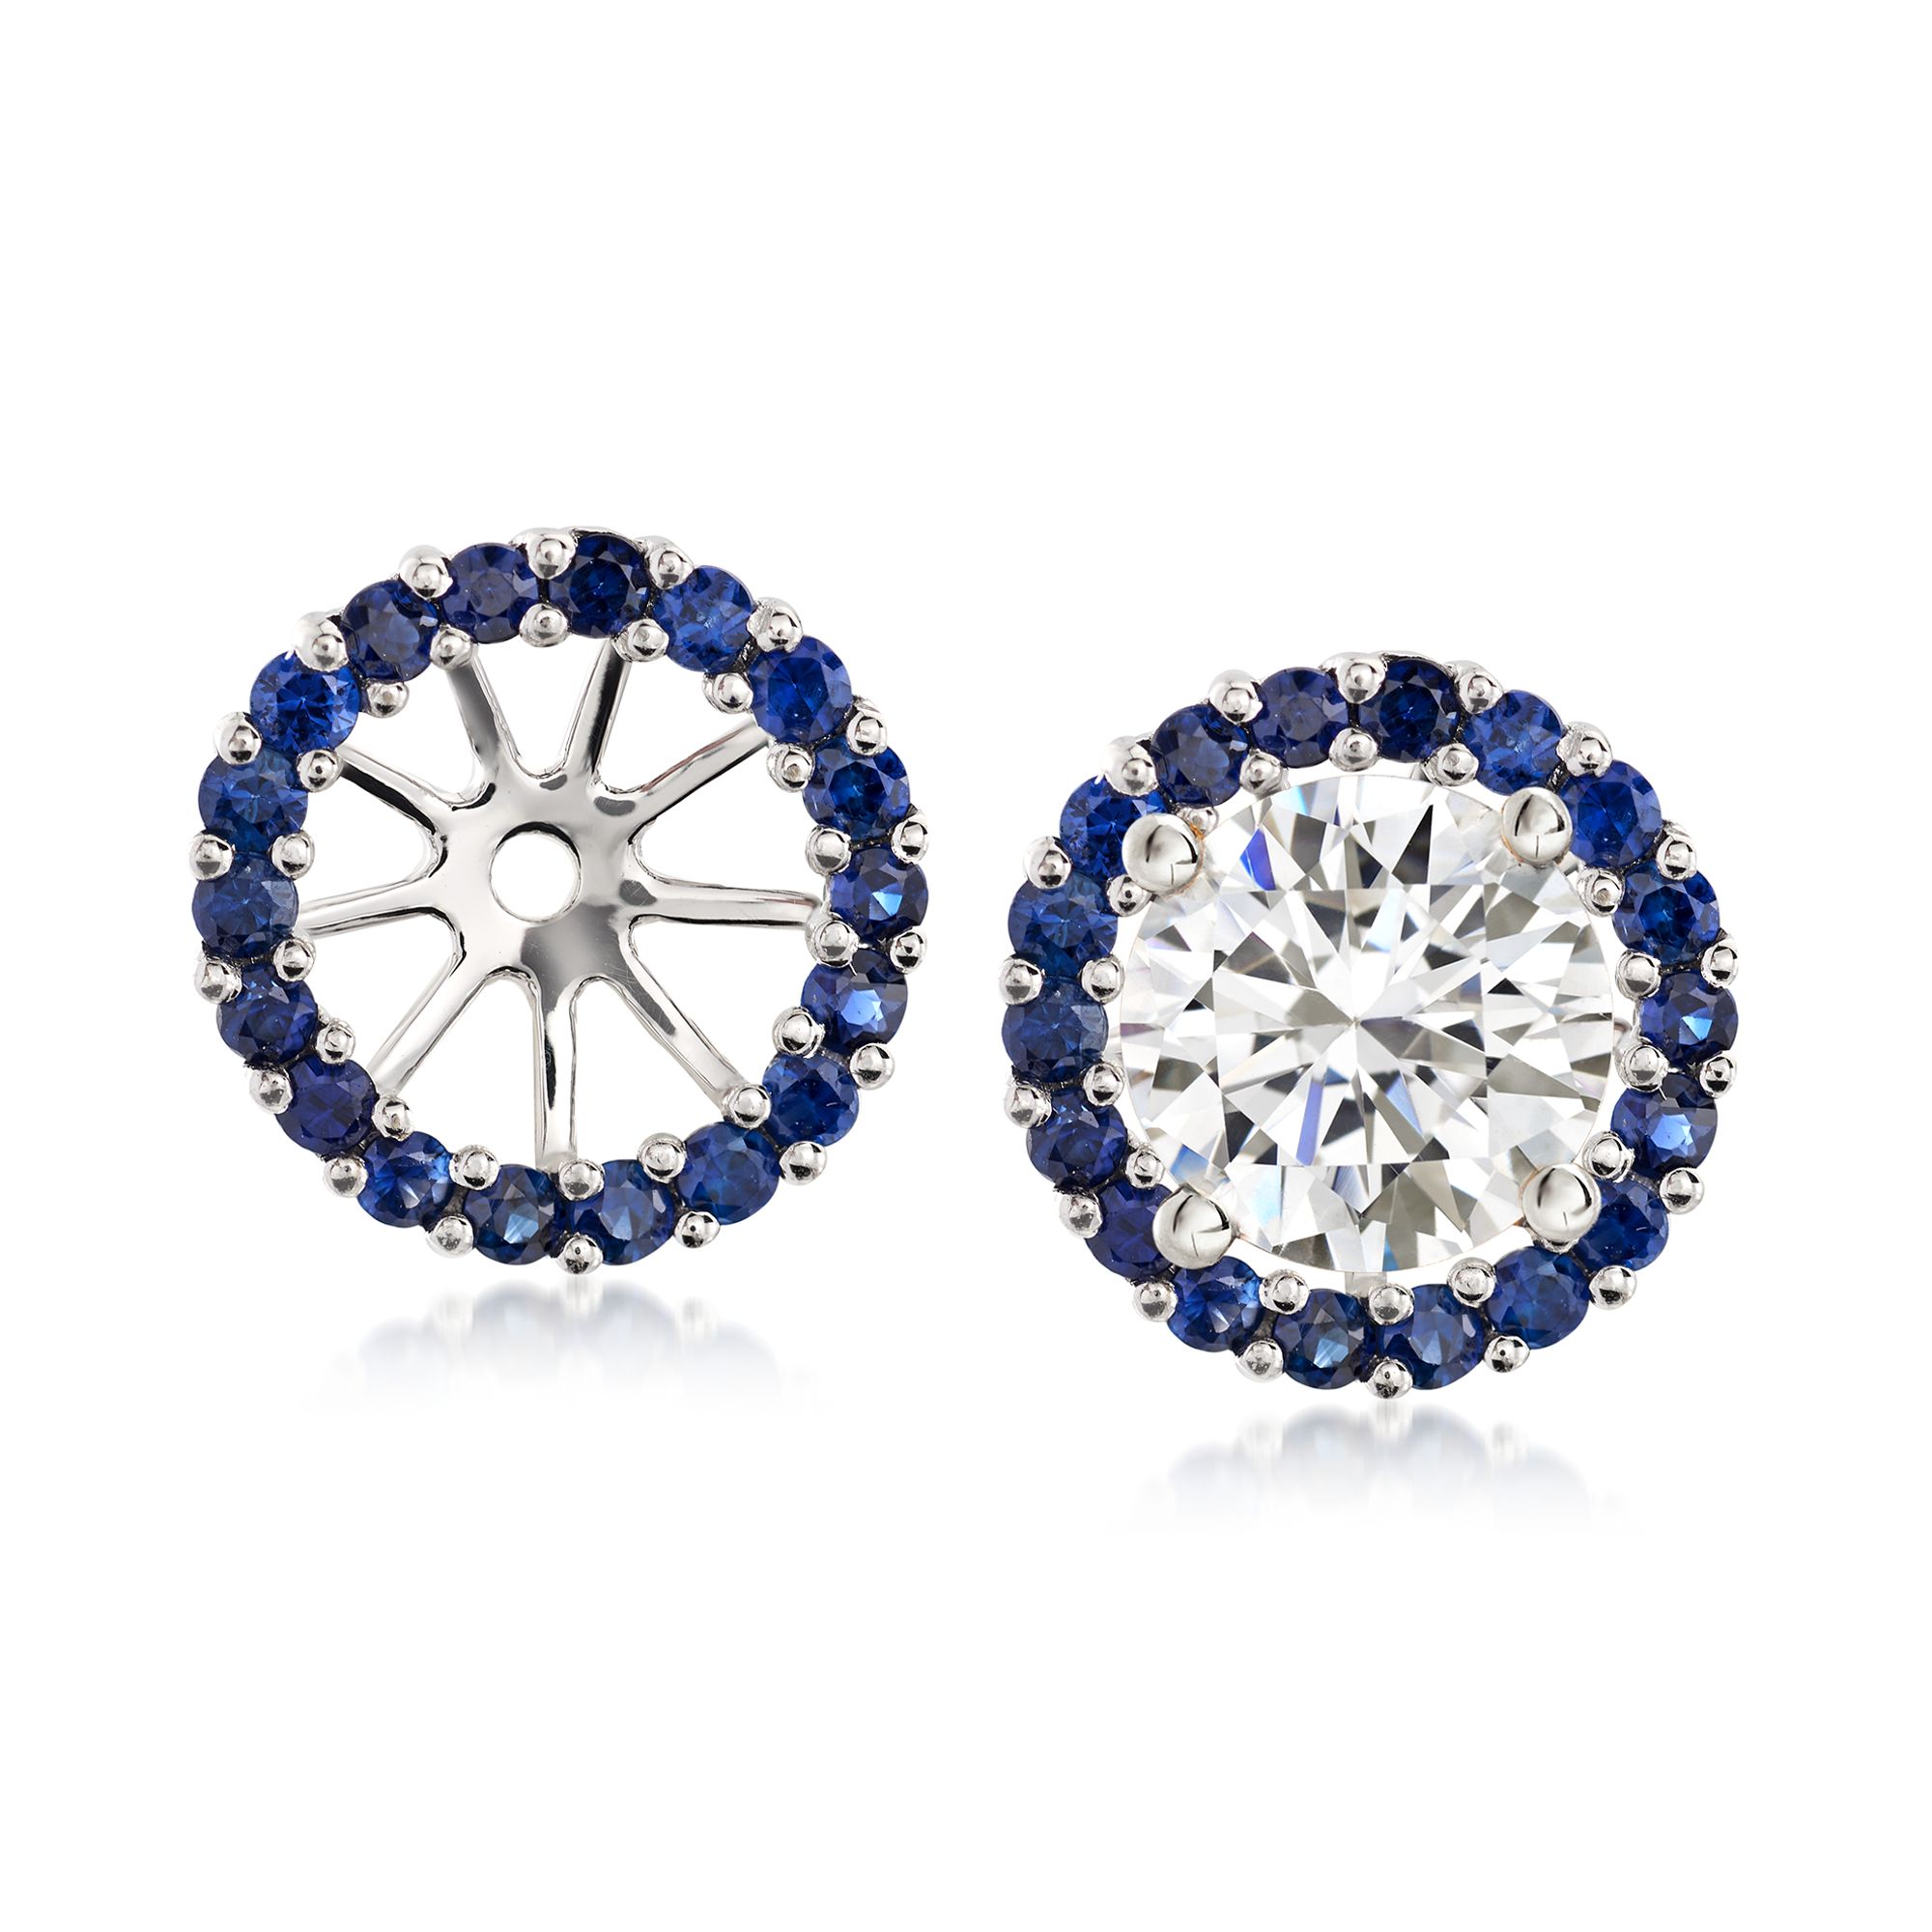 50 ct. t.w. Sapphire Earring Jackets in 14kt White Gold | Ross-Simons